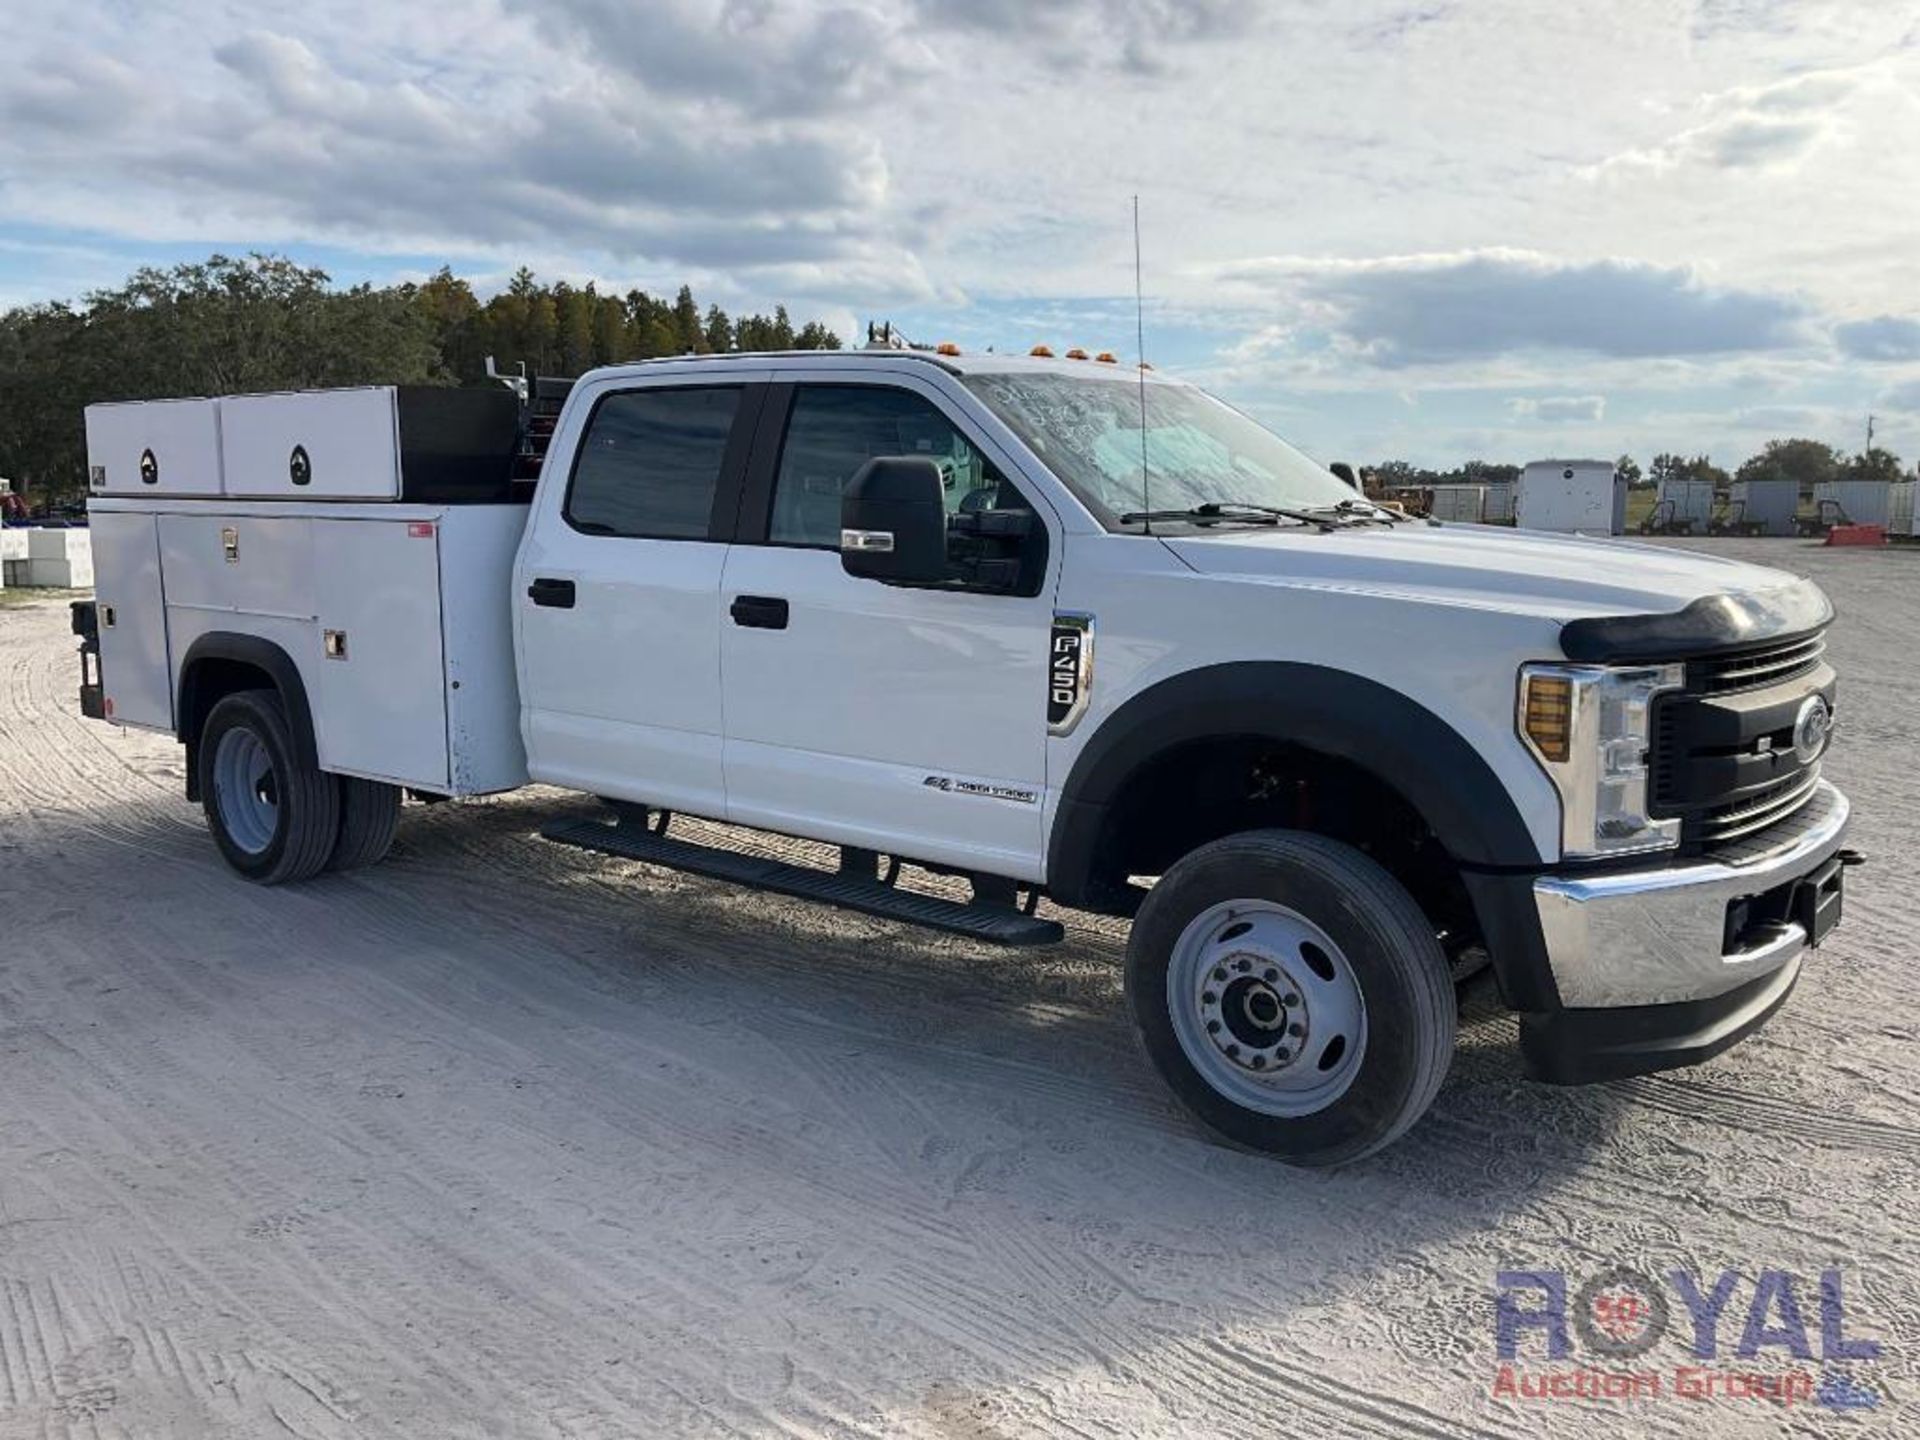 2019 F450 4x4 Service Truck - Image 2 of 34